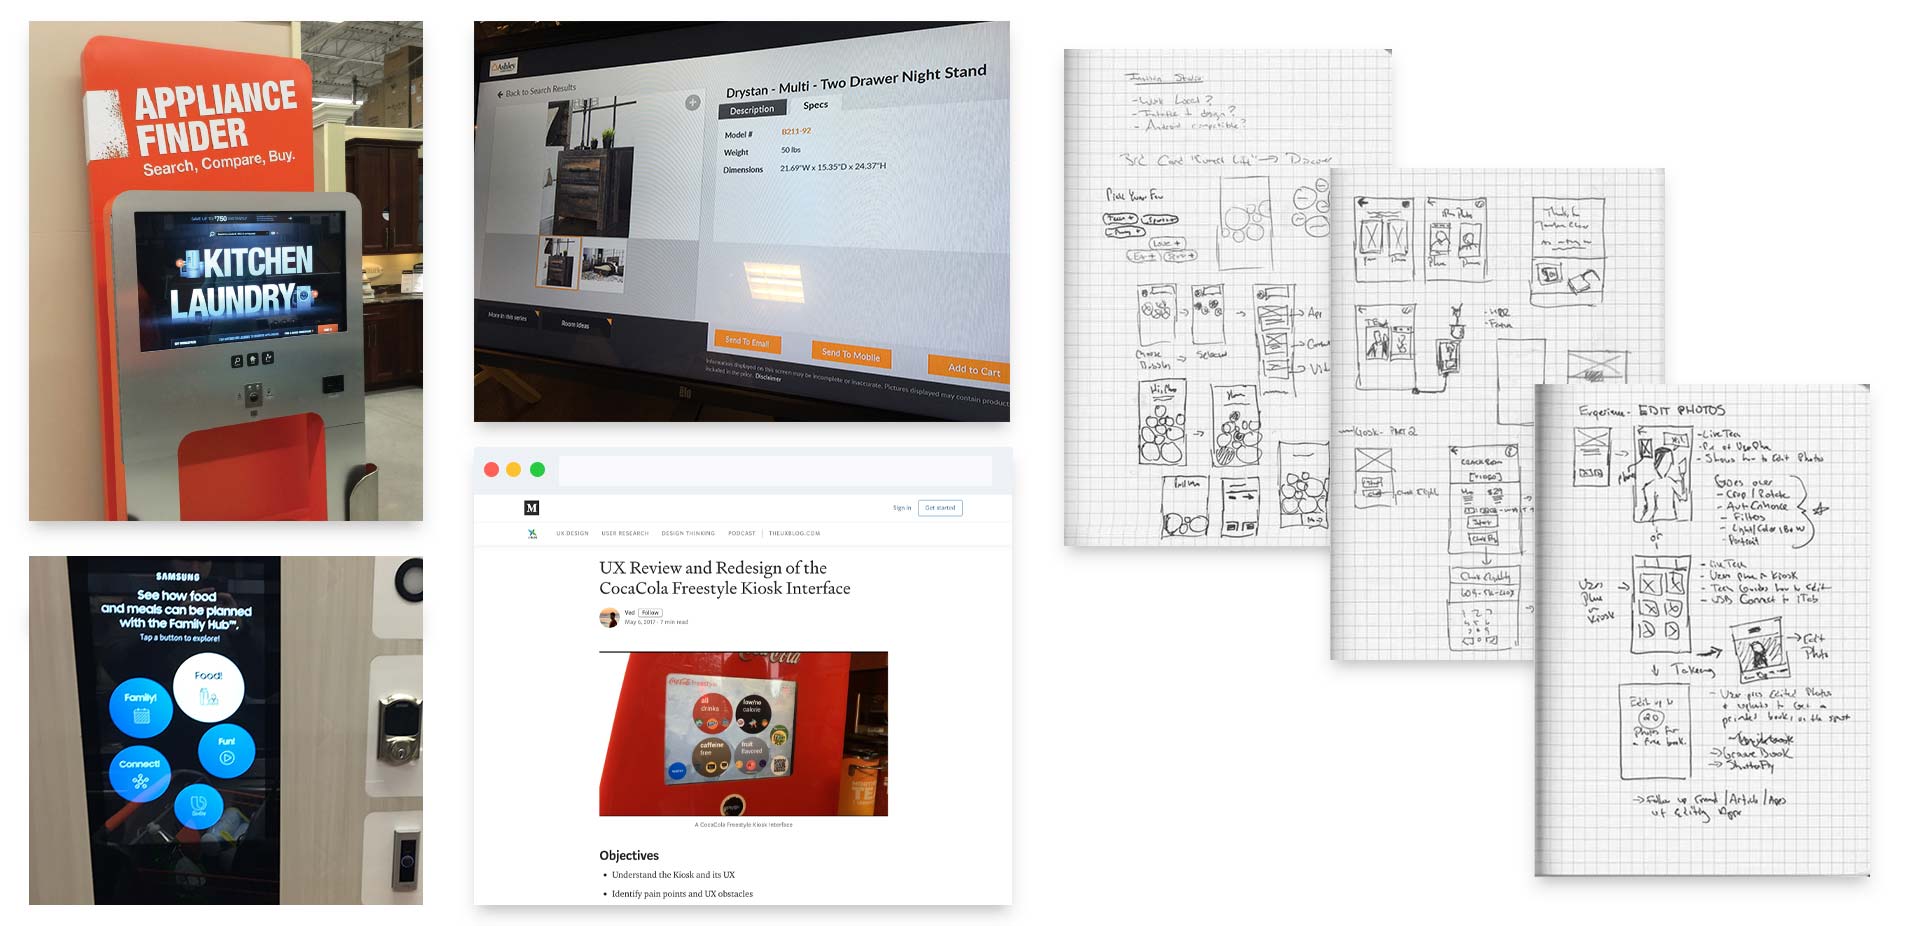 Home depot, Samsung and Ashley furniture touchscreens next to sketches of kiosk interface ideas.